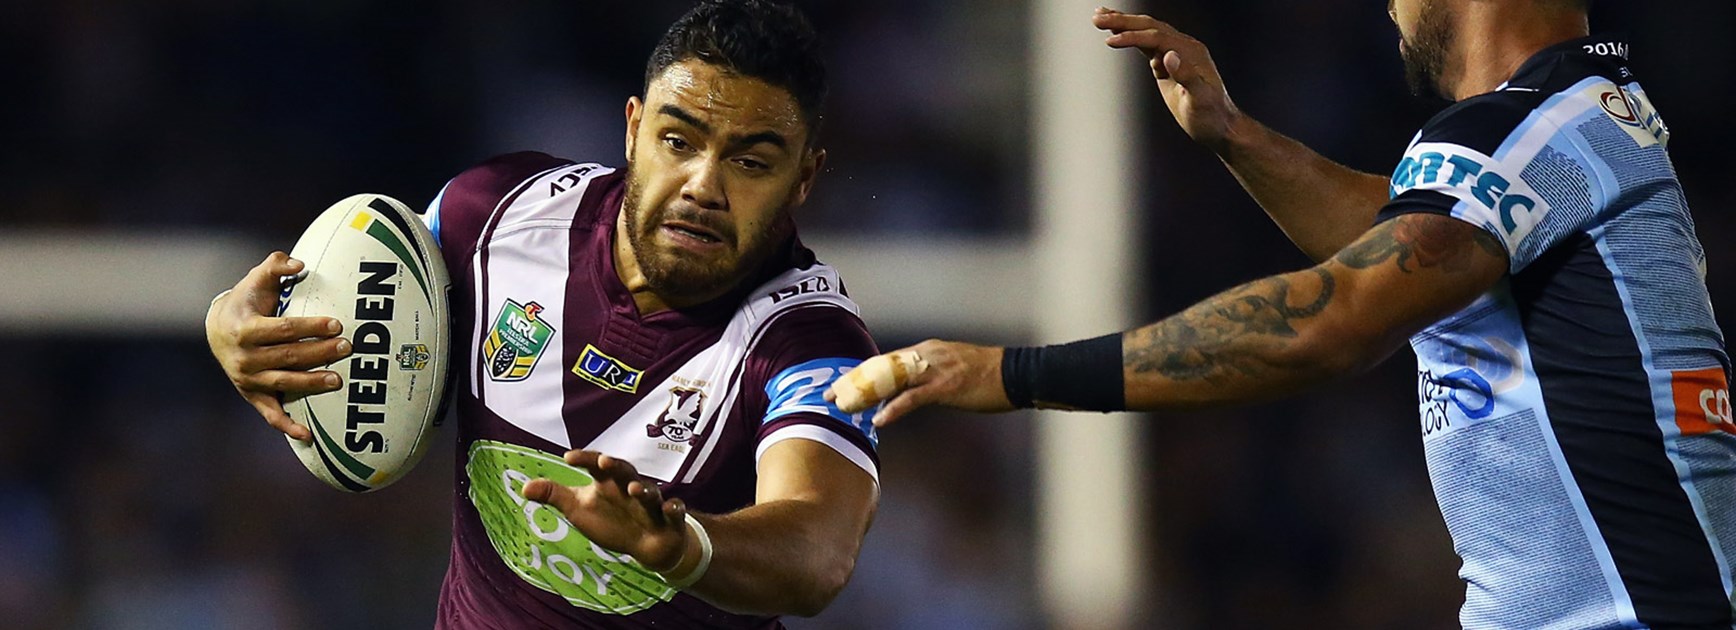 Sea Eagles five-eighth Dylan Walker against the Sharks in Round 11.